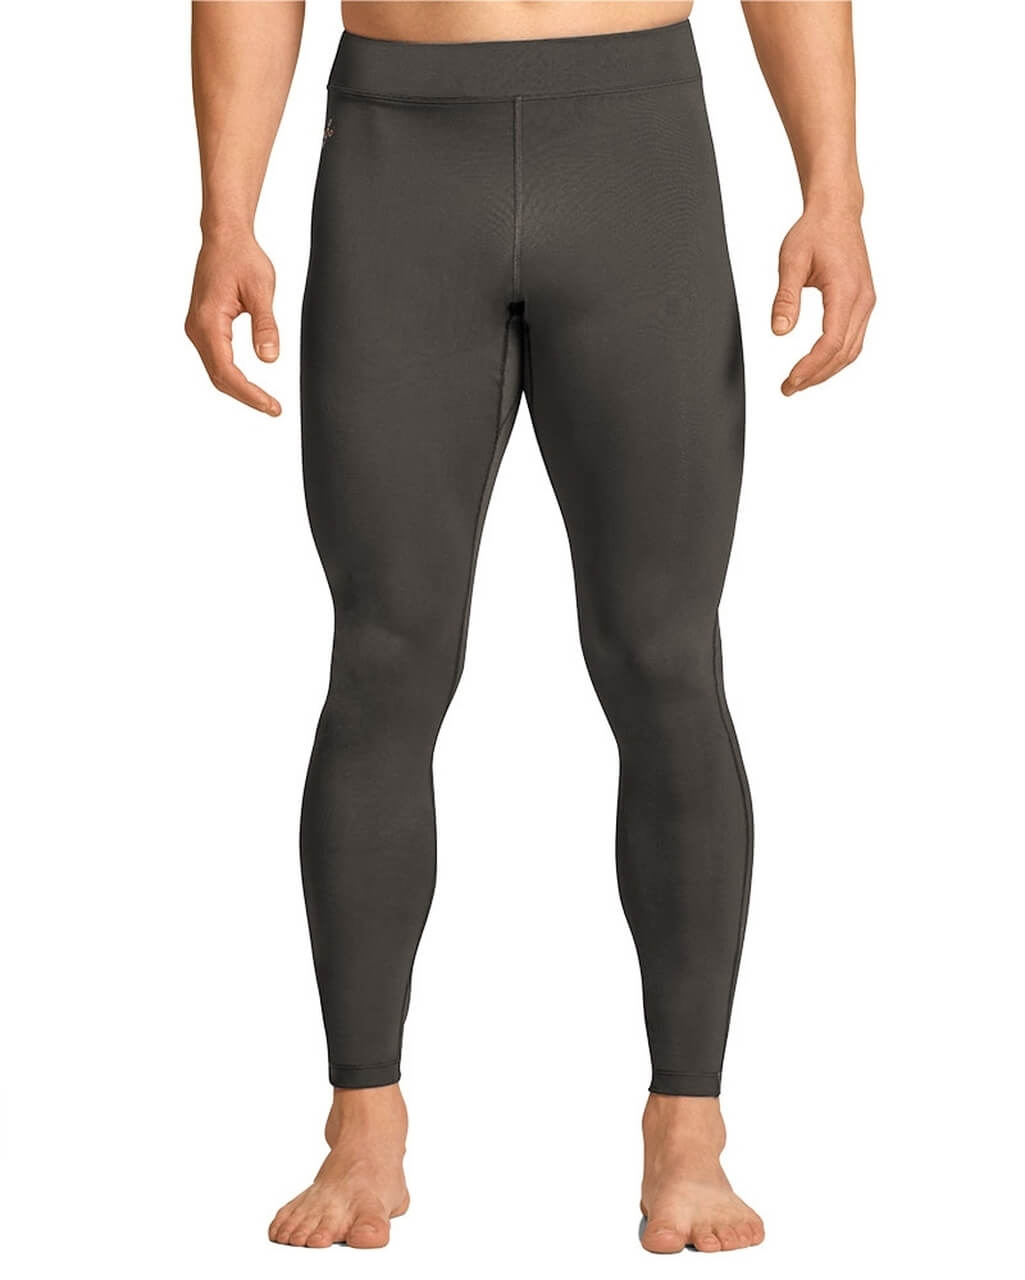 Men's Compression Tights  Shop From Tommie Copper®